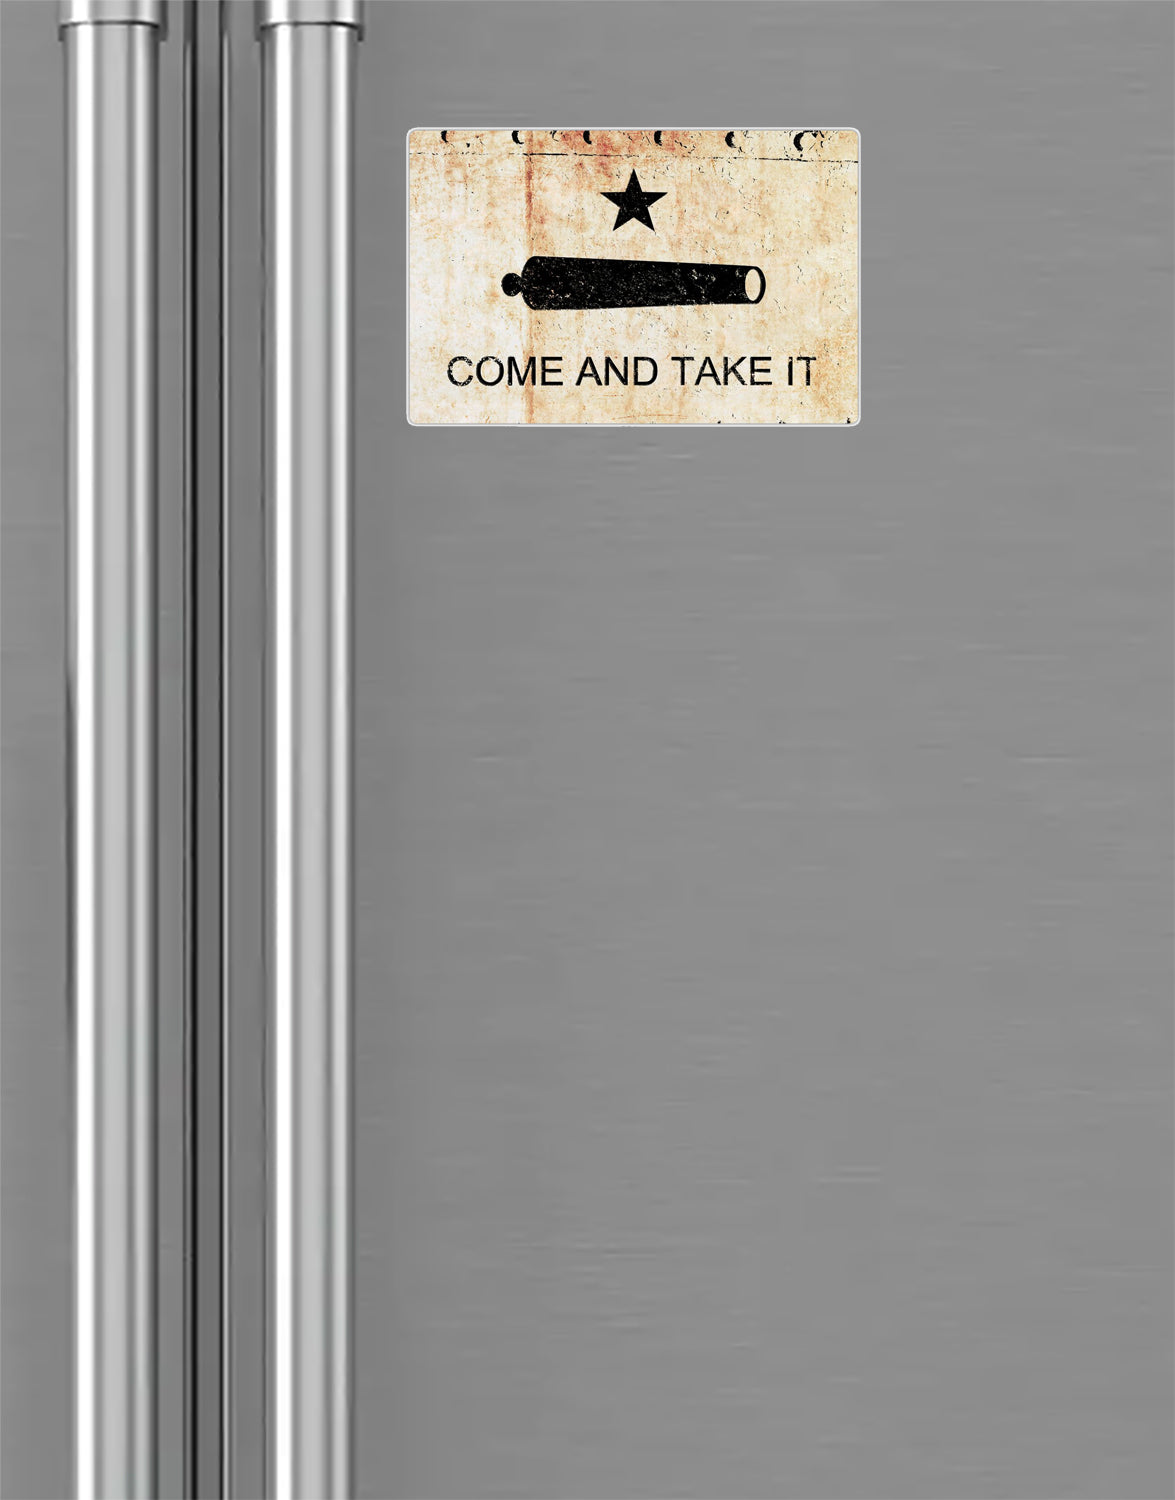 Come and Take it Fridge Magnet - Gonzales Battle Flag on Rusted Riveted Plate Print on 4x6 magnet on fridge